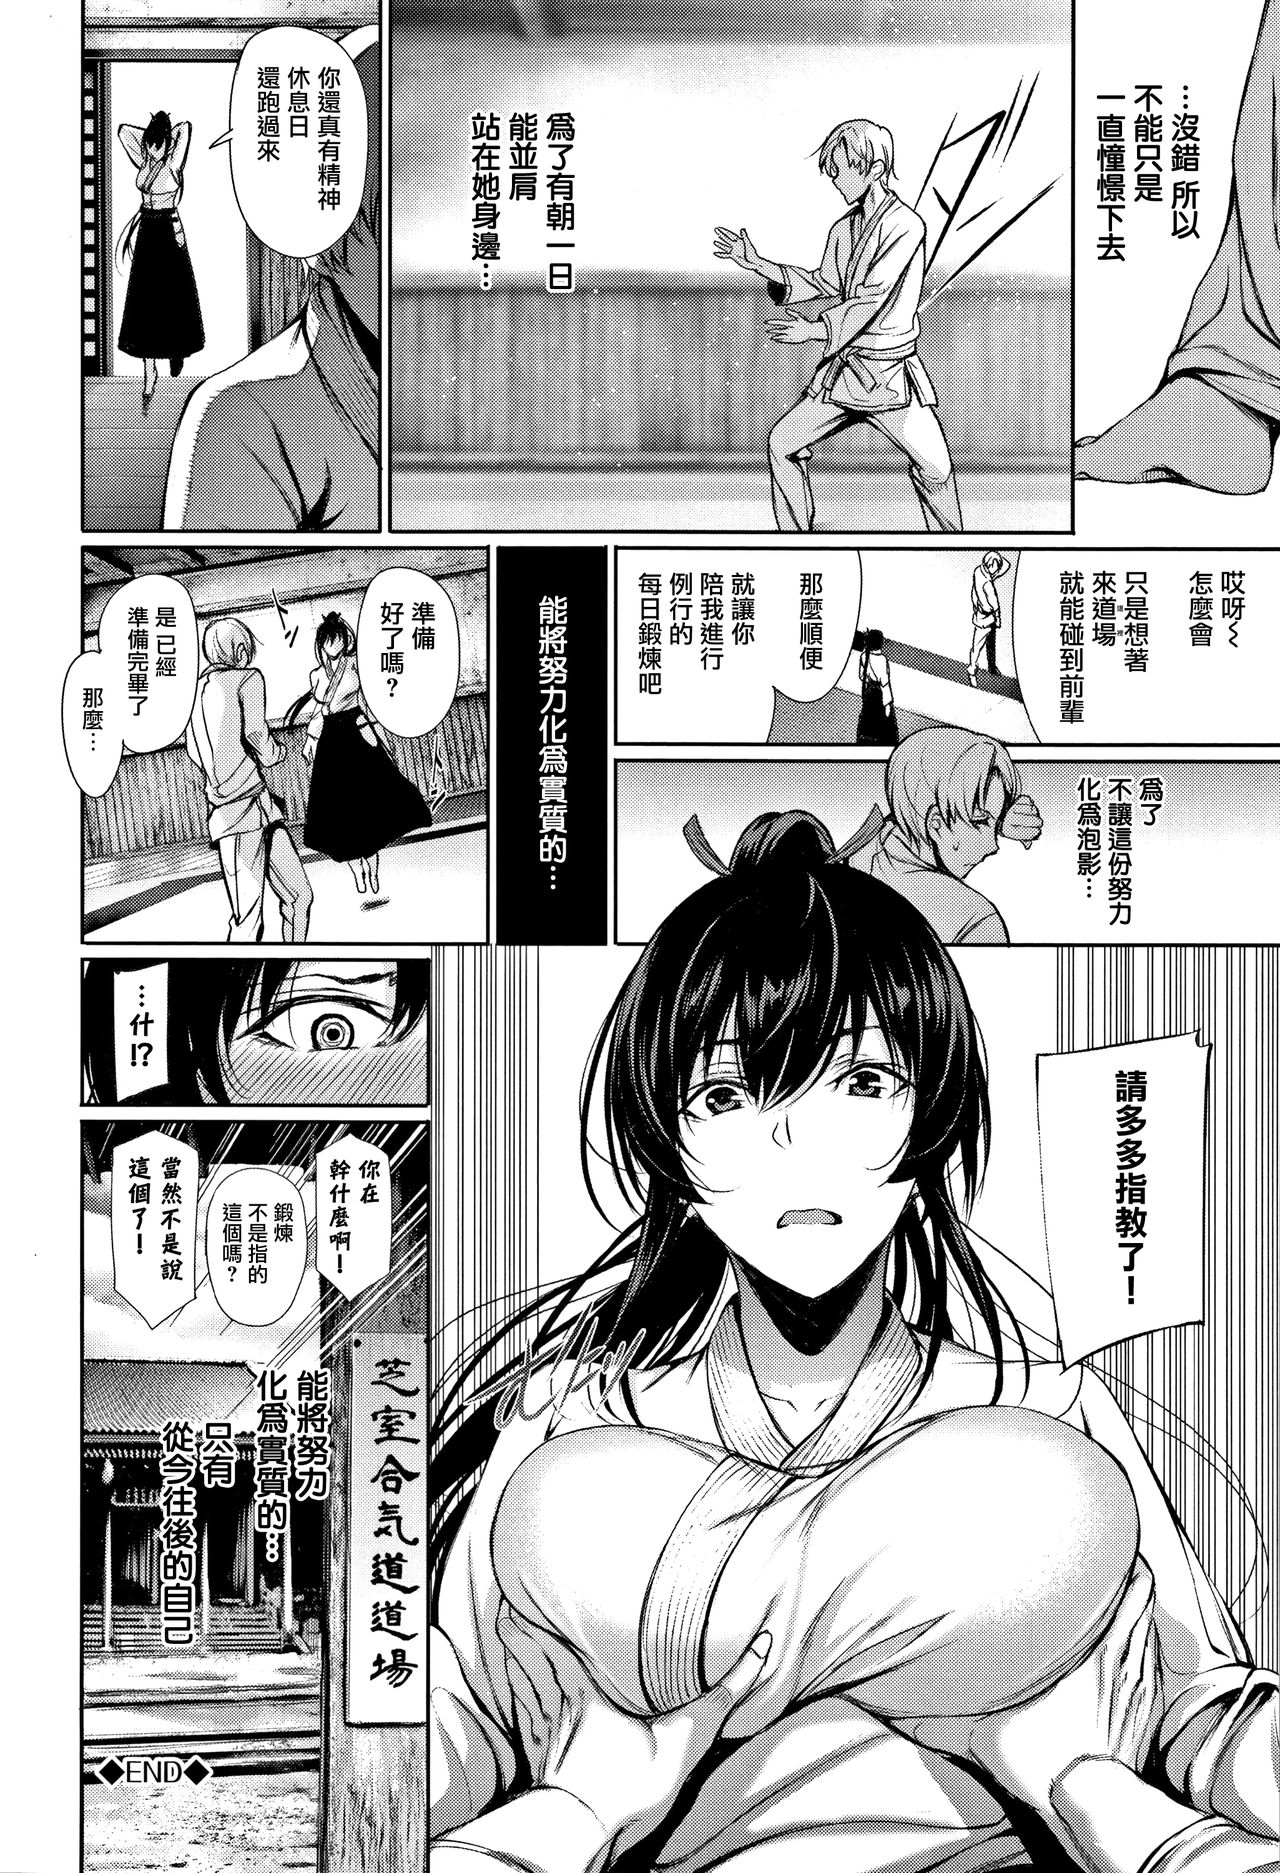 [Gentsuki] Kimi Omou Koi - I think of you. Ch. 1-2 [Chinese] [无毒汉化组] page 29 full